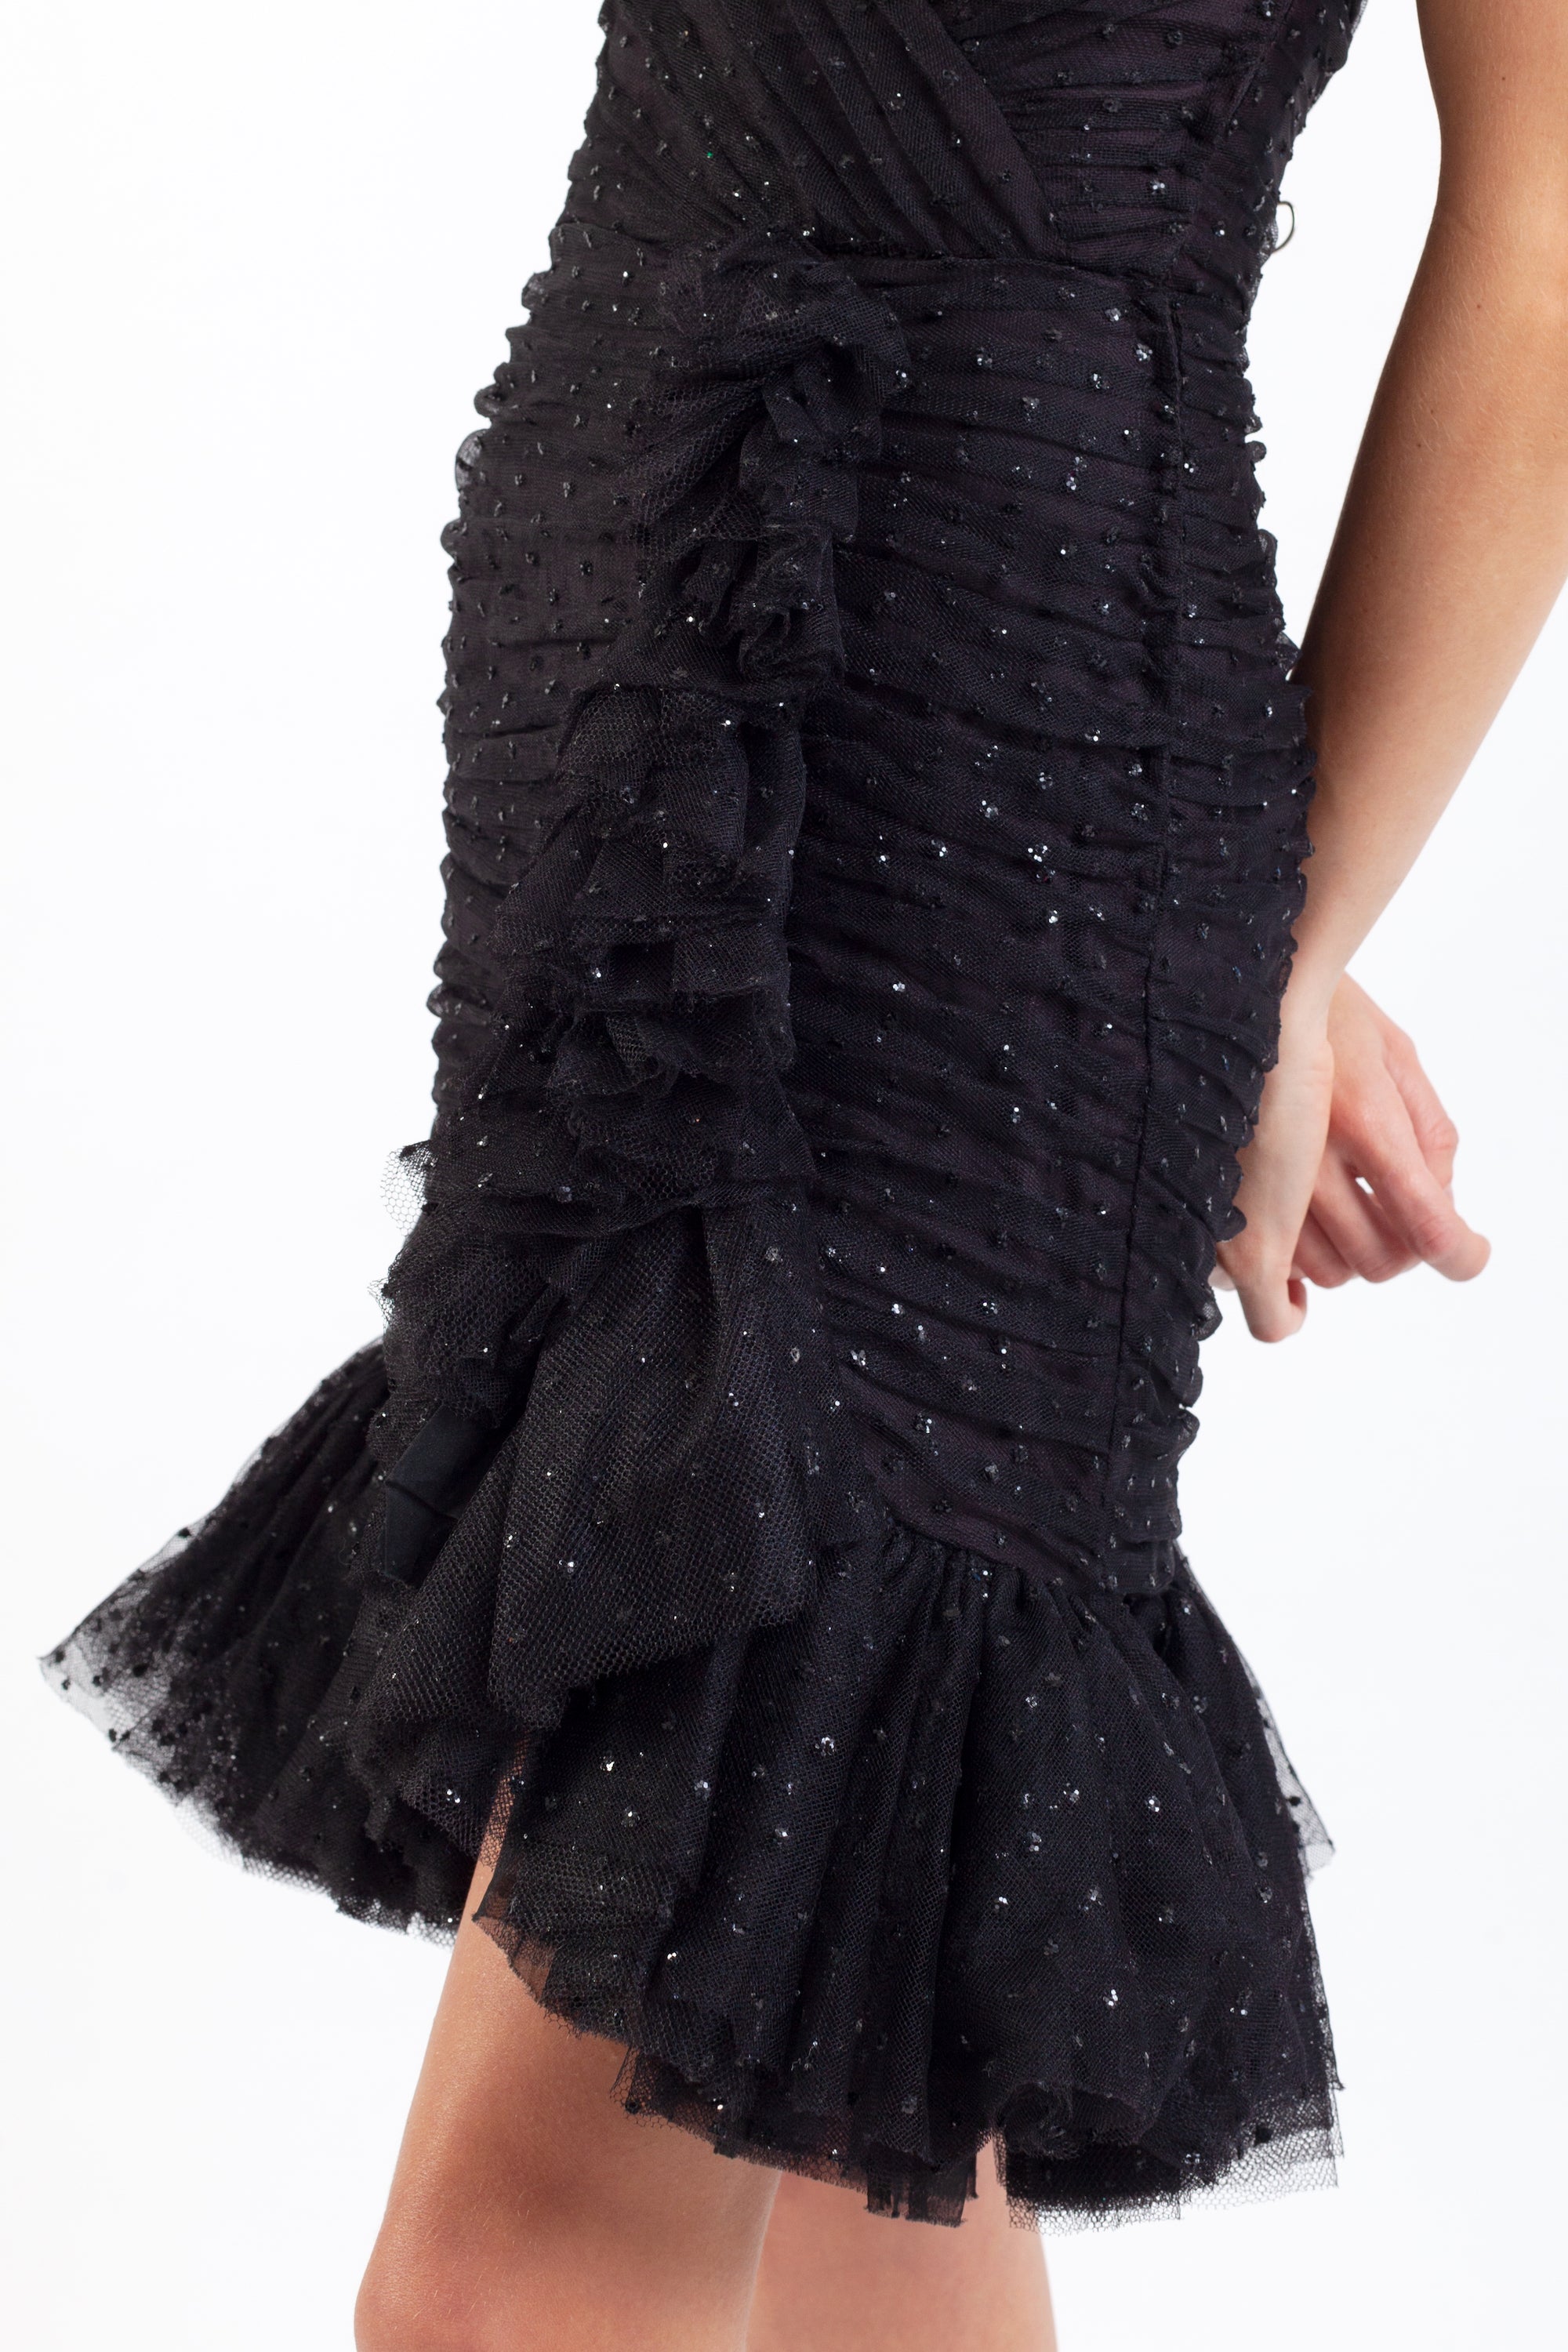 Lorcan Mullany <br> 80's strapless glitter tulle party dress